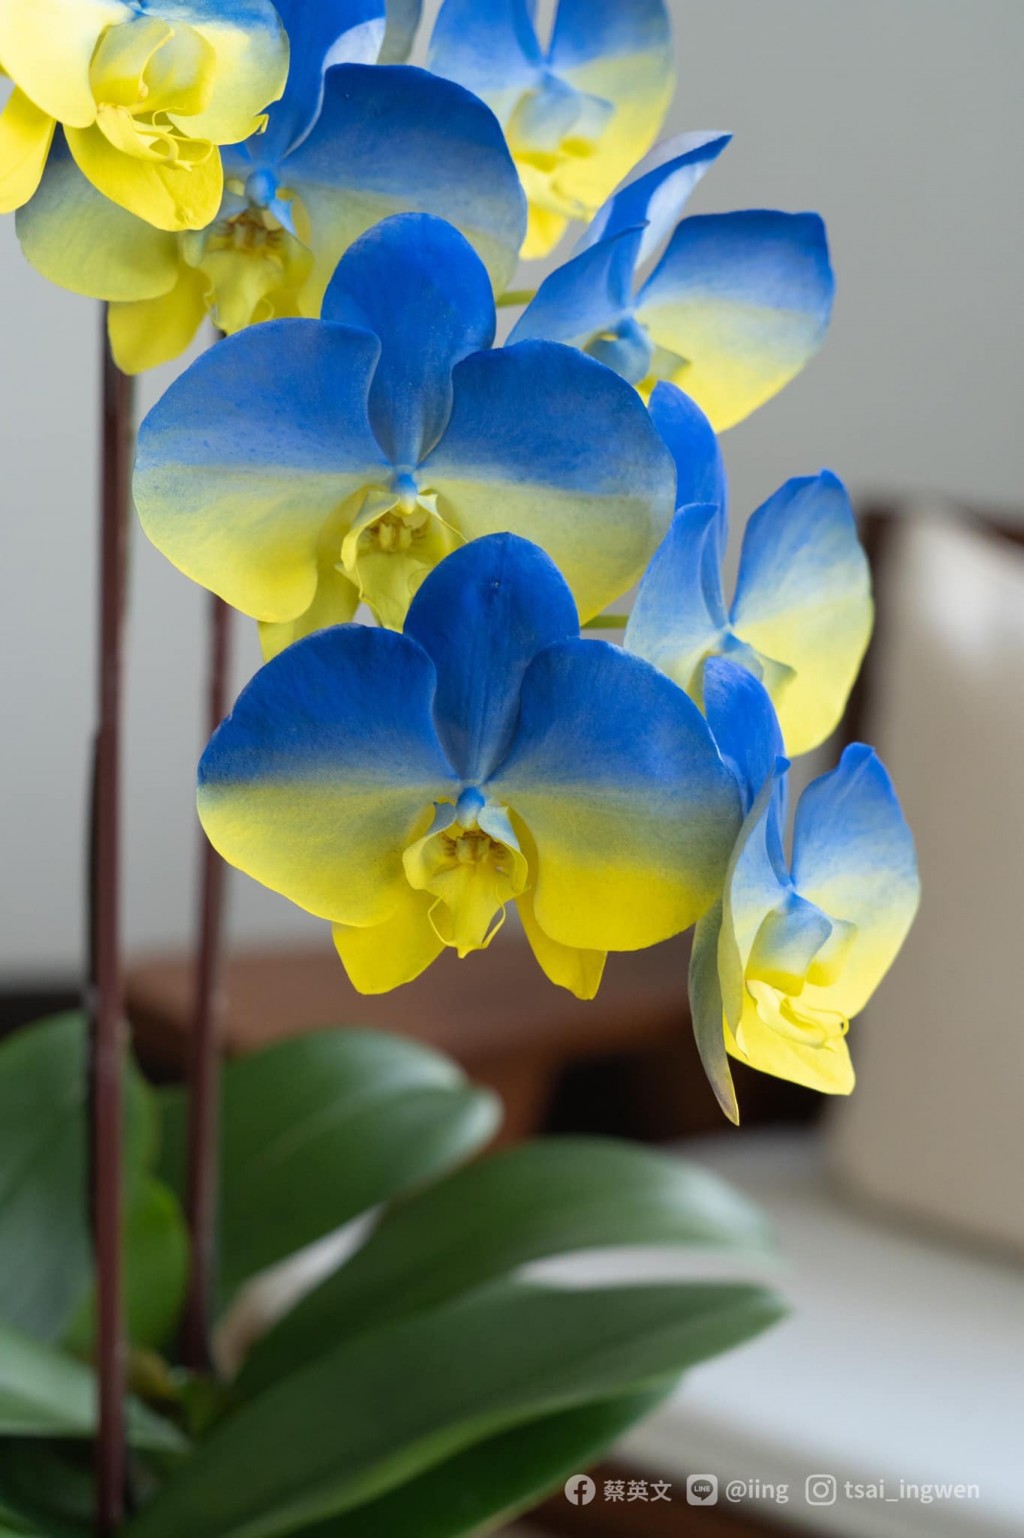 Photo of the Day: Taiwan orchids bloom with colors of Ukrainian flag